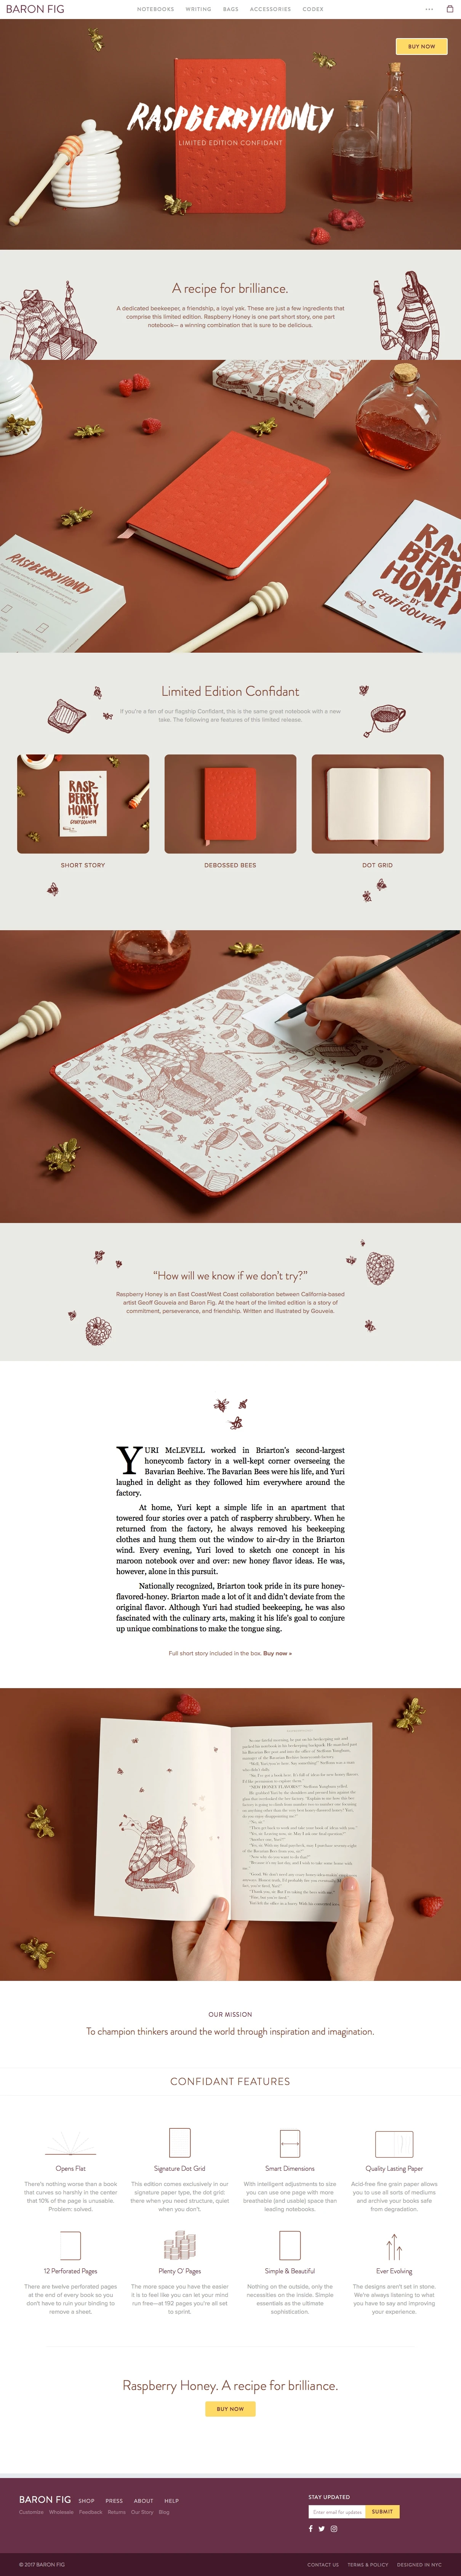 Raspberry Honey Landing Page Example: Raspberry Honey is one part short story, one part notebook— a winning combination that is sure to be delicious.